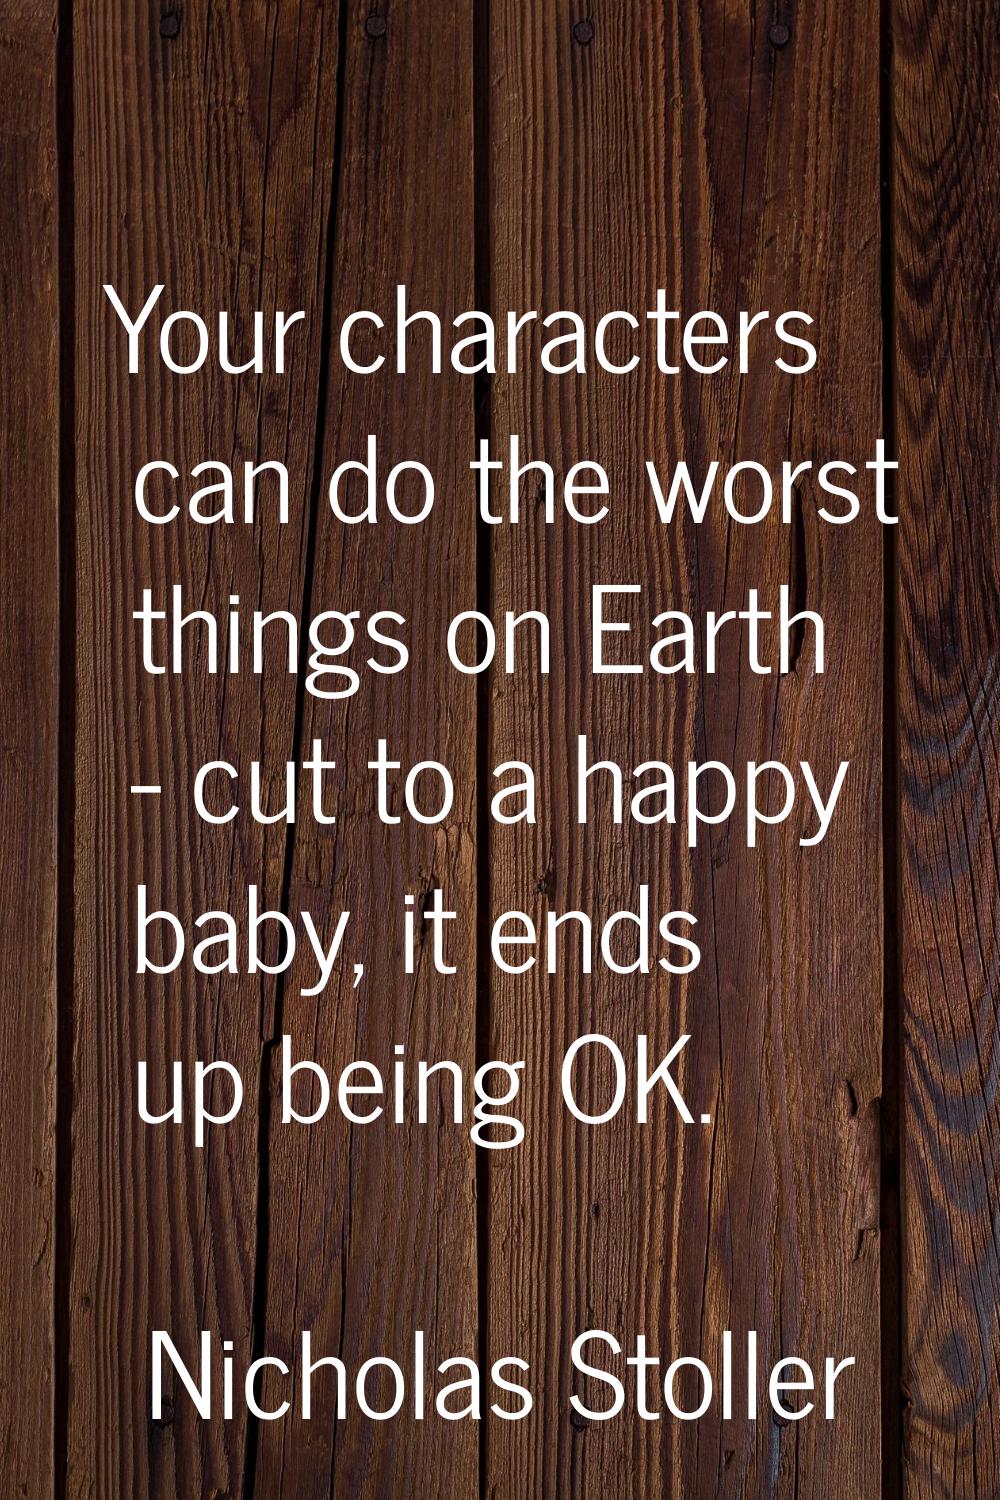 Your characters can do the worst things on Earth - cut to a happy baby, it ends up being OK.